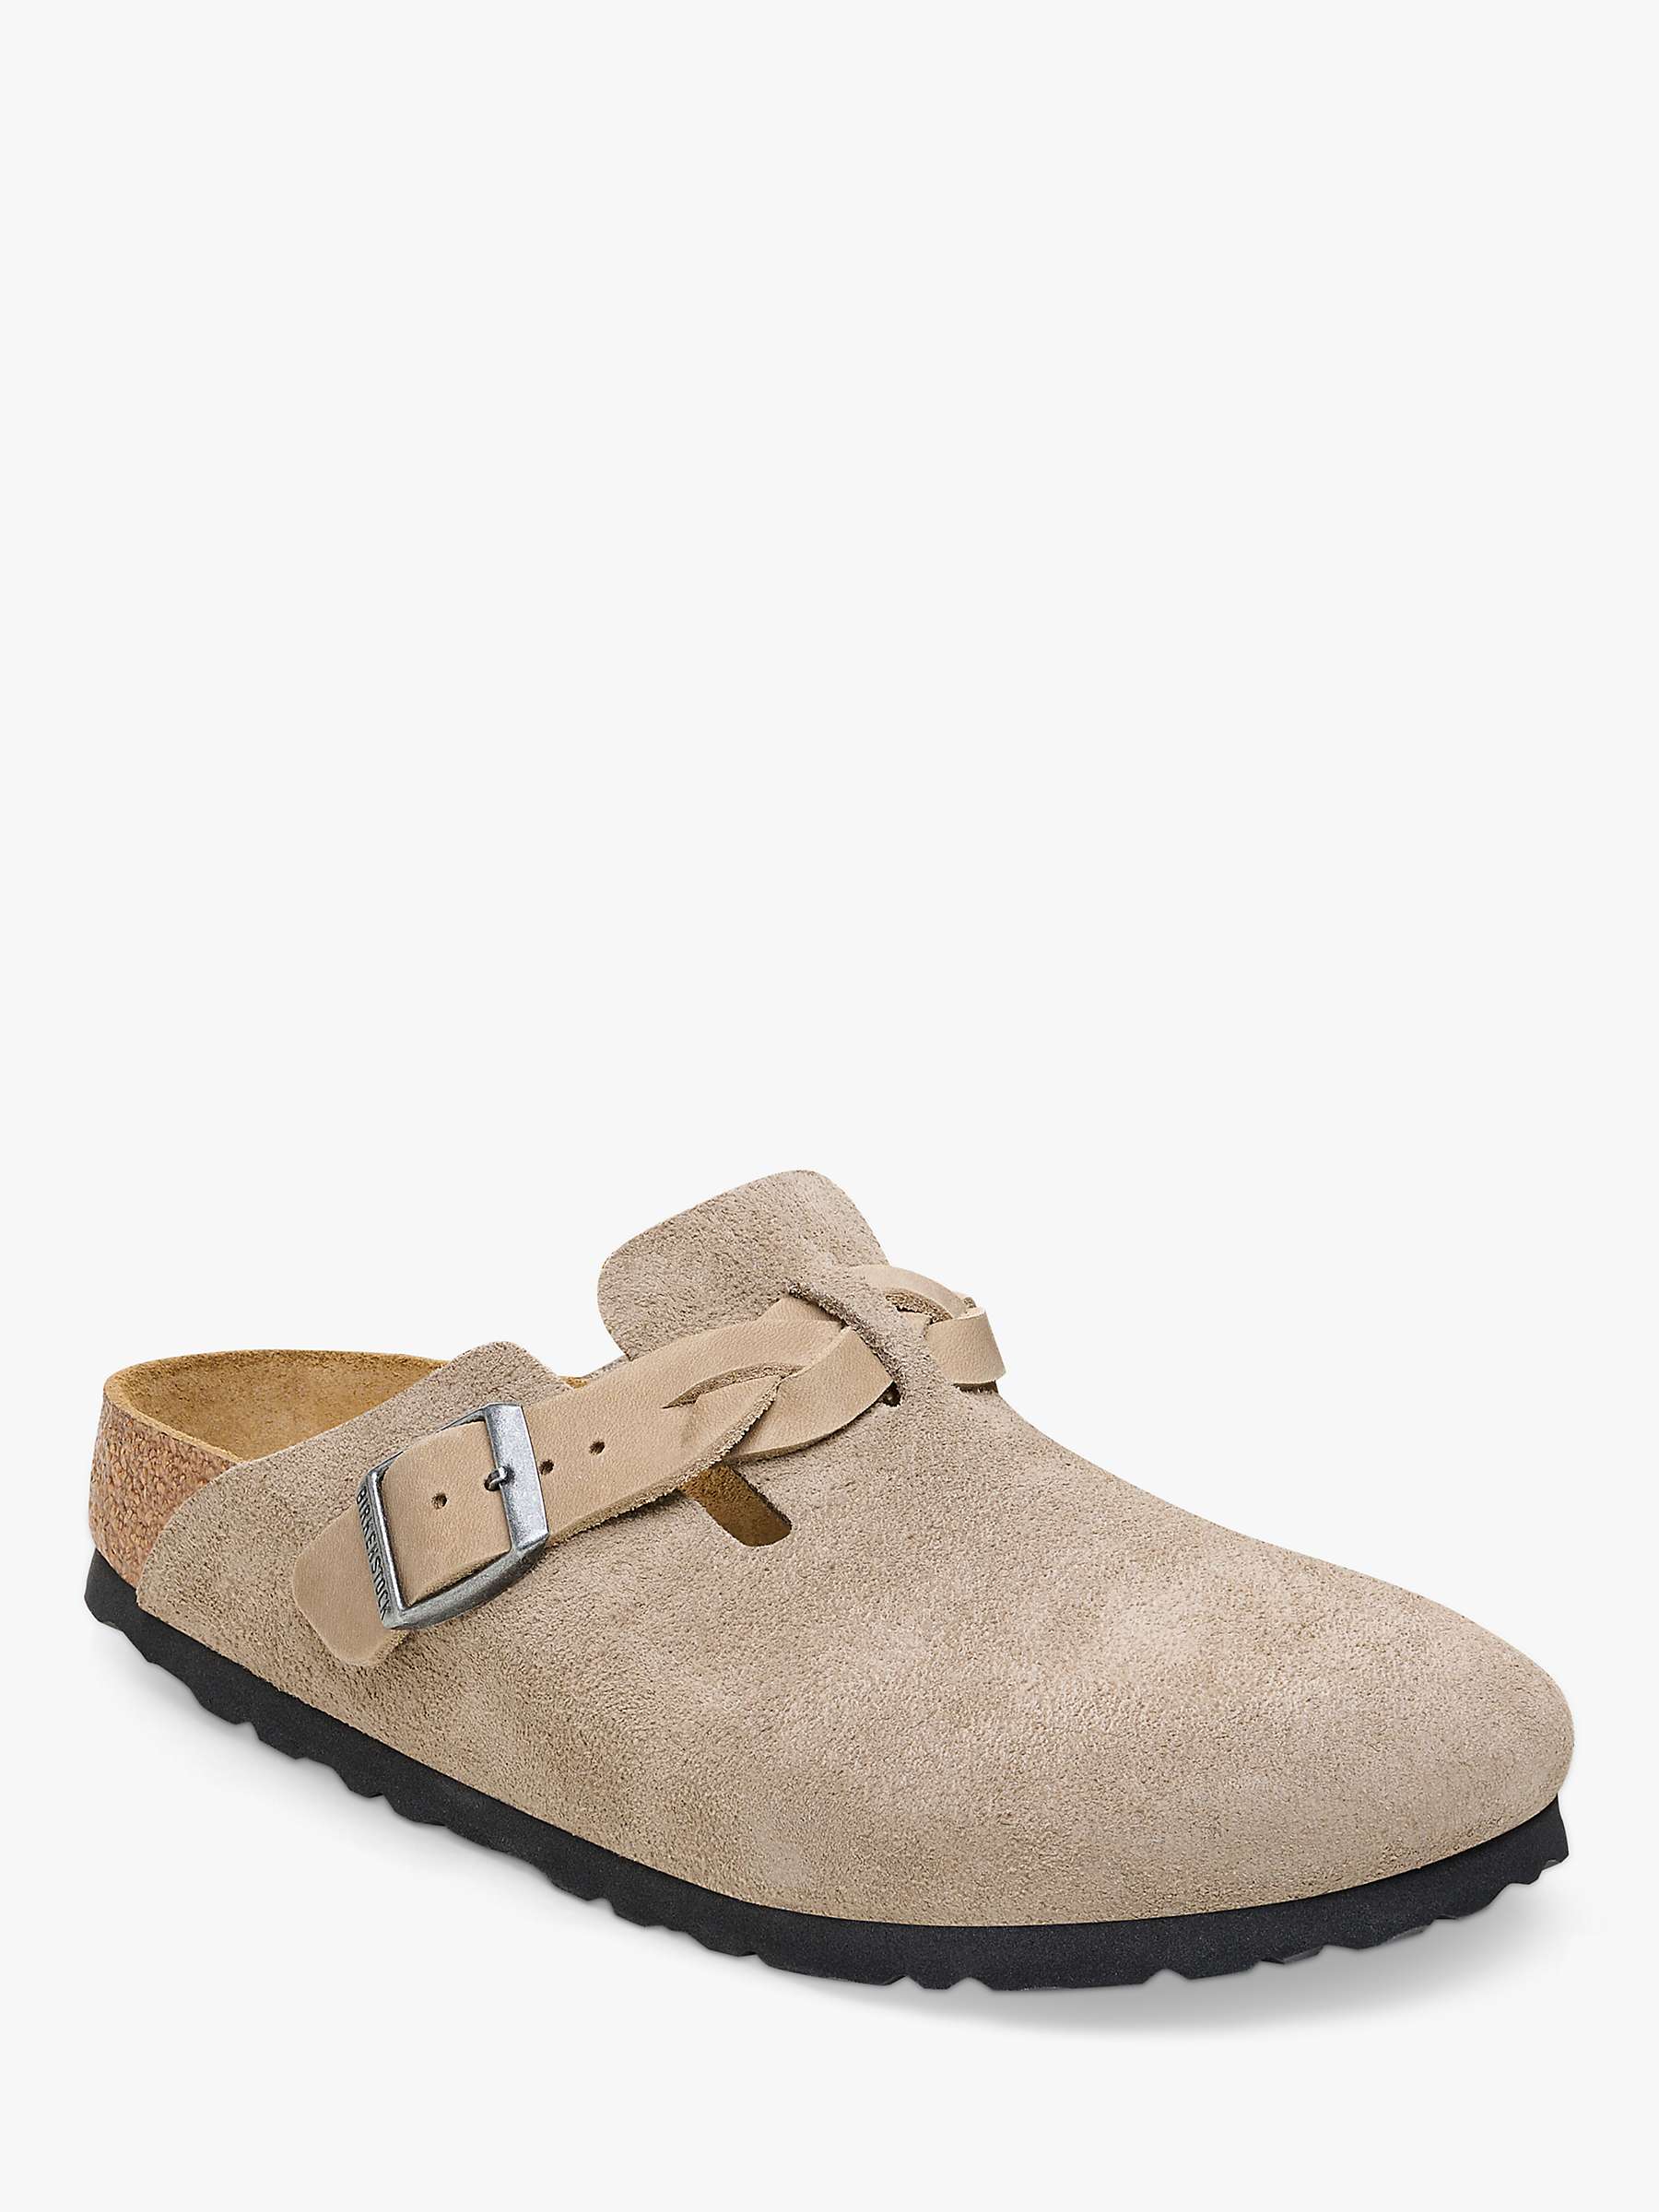 Buy Birkenstock Braided Buckle Suede Clogs, Taupe Online at johnlewis.com